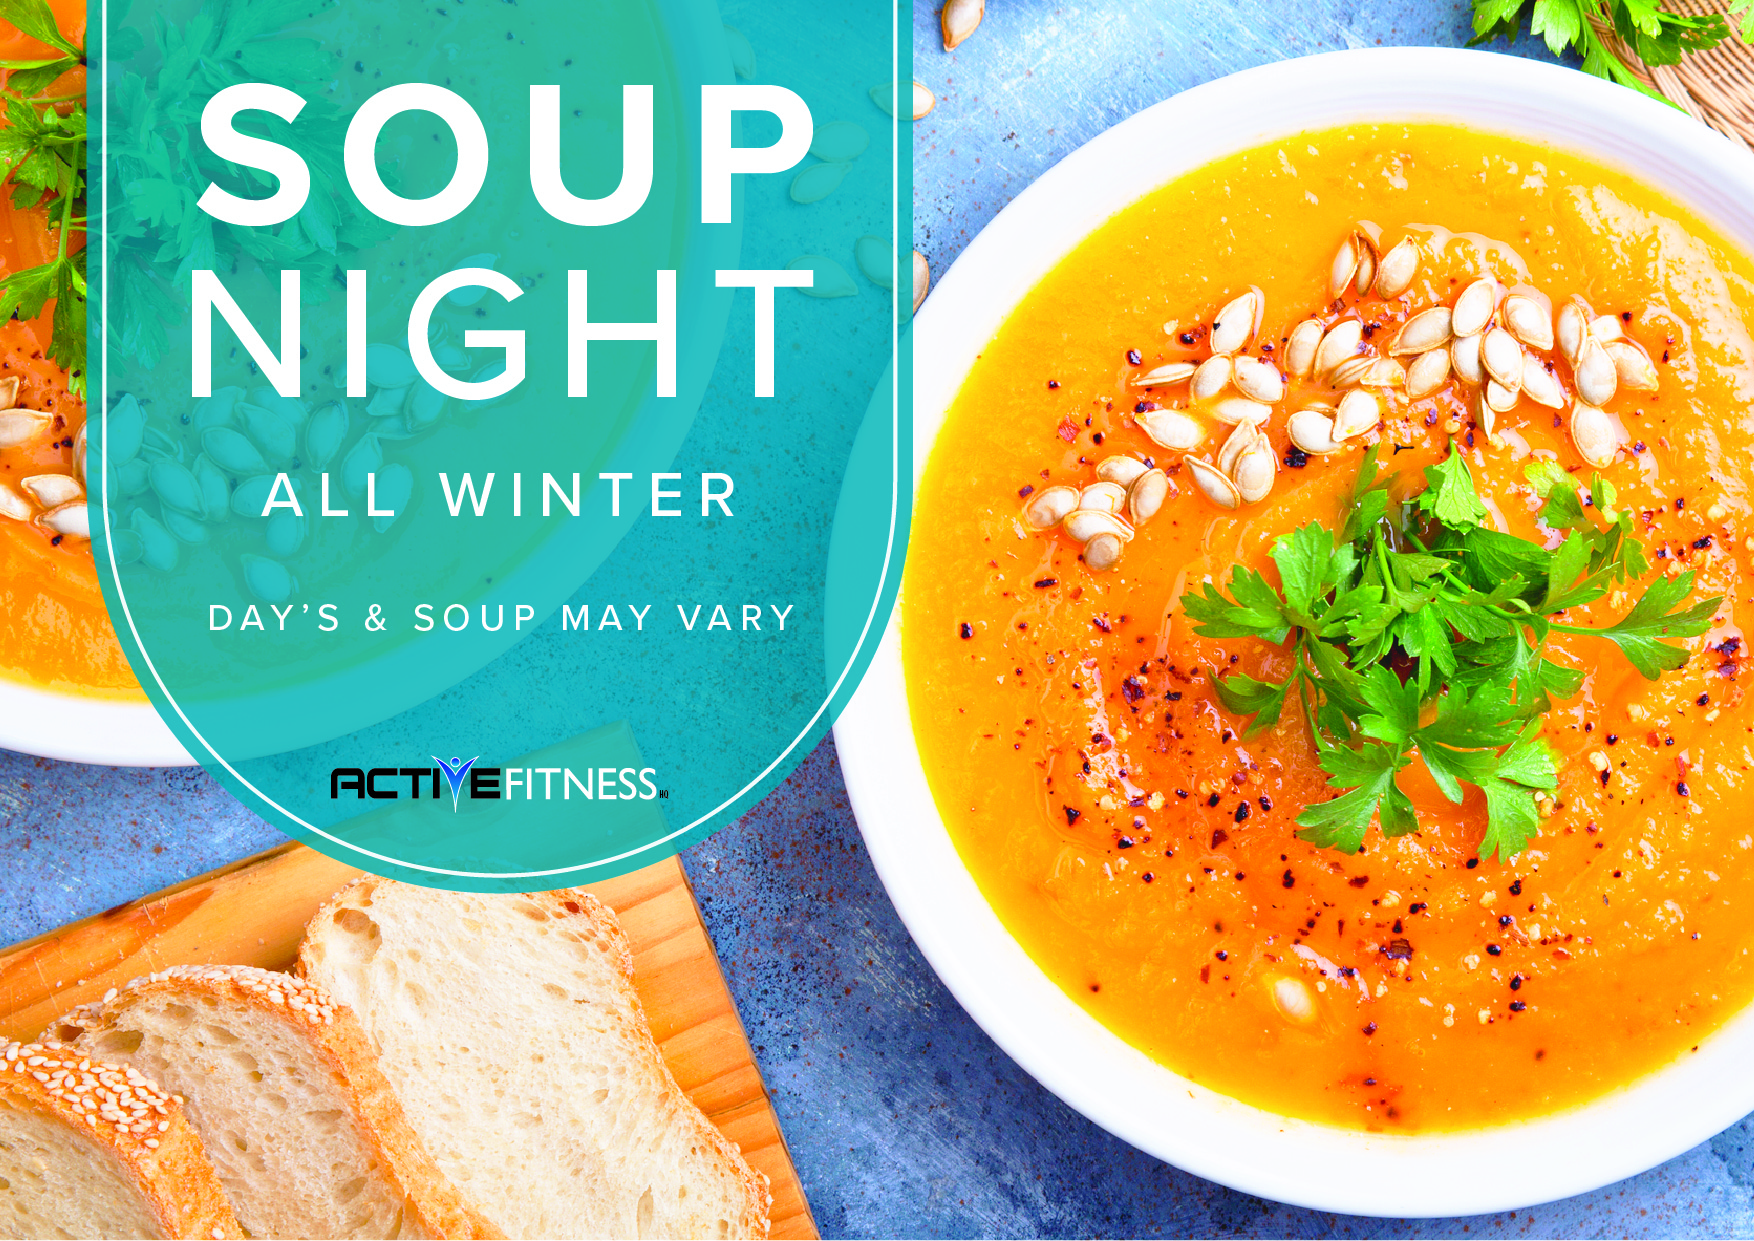 Soup night at AFHQ all Winter!